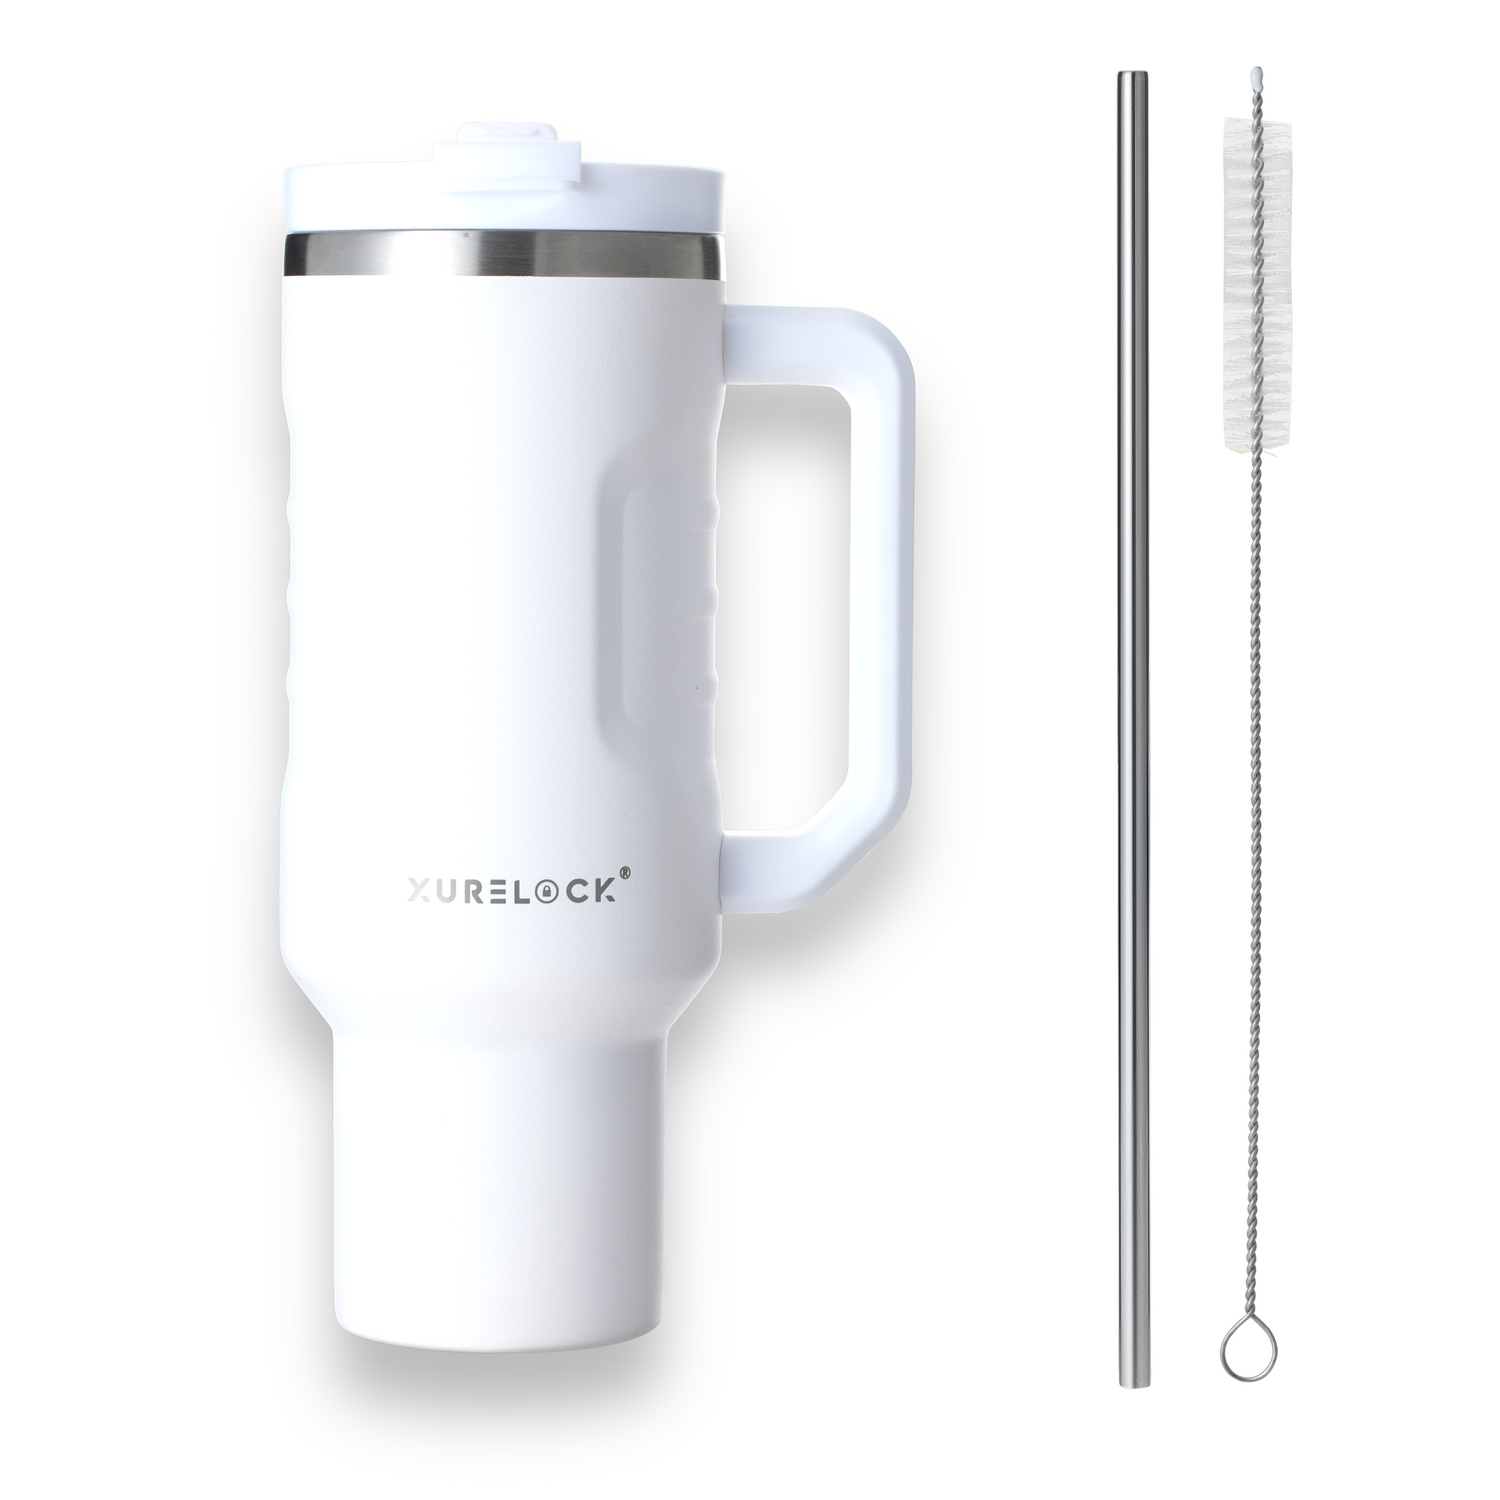 Xurelock Travel Mug 40oz - Insulated, Stainless Steel with Straw and Lid, Durable Handle, Perfect for Hot and Cold Beverages